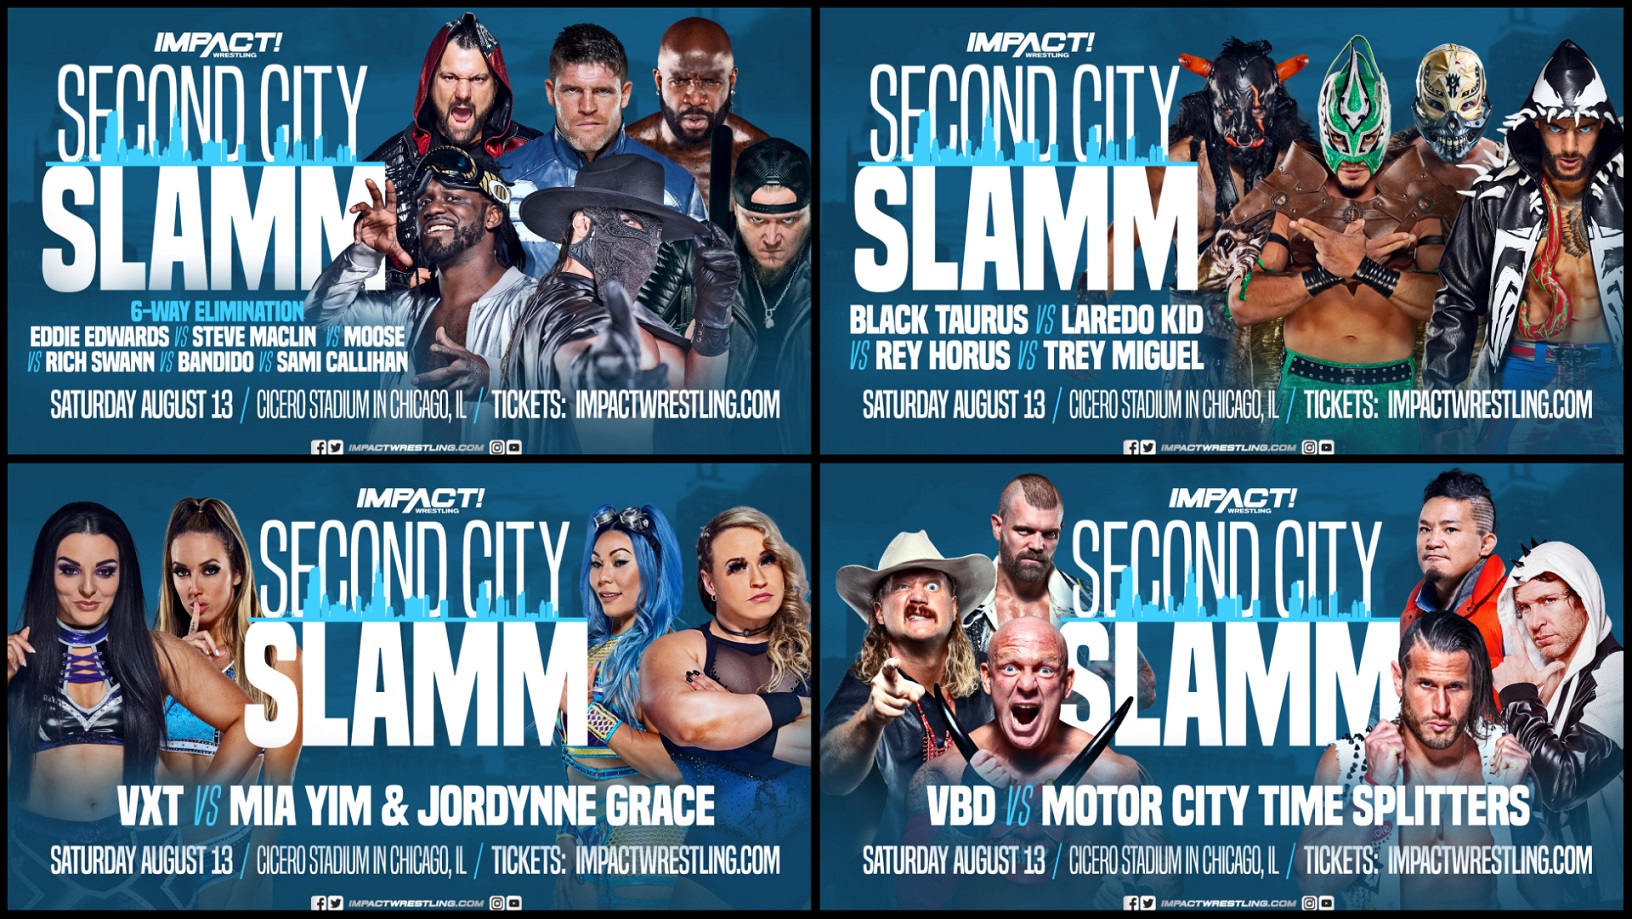 Witness These Incredible Matchups & So Many More This Saturday at Second City Slamm in Chicago